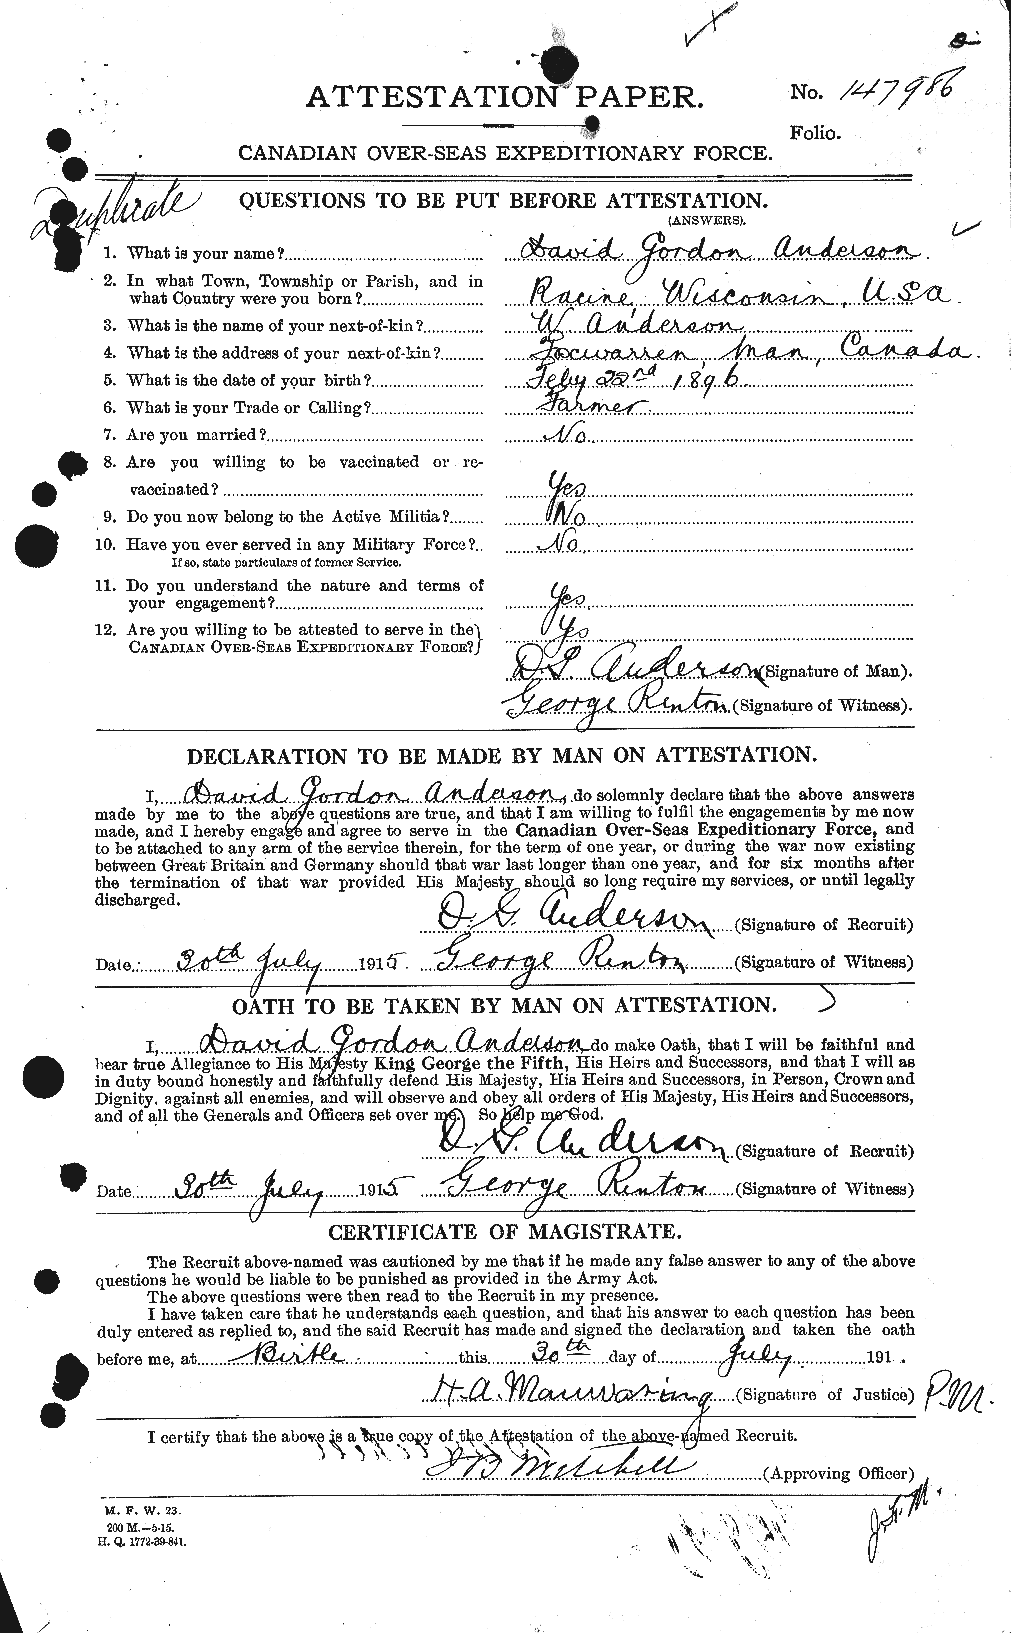 Personnel Records of the First World War - CEF 210012a